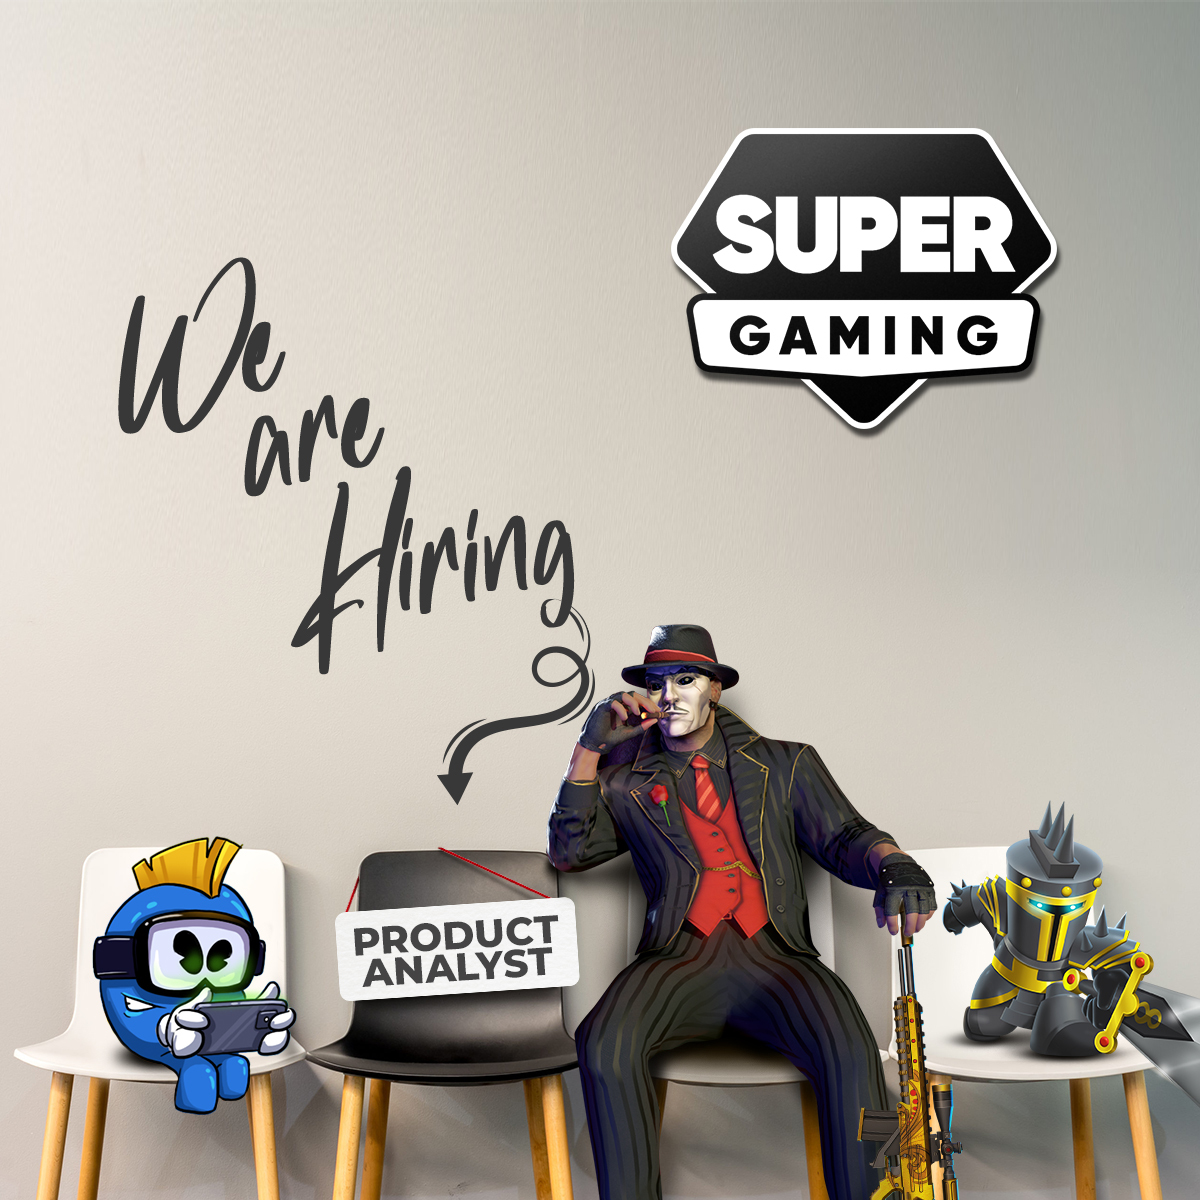 Are you a Product Analyst looking for a productive role in a progressing environment? 

Click here, 👇
lnkd.in/eynmv2bR
and apply for the role of Product Analyst at SuperGaming 🙌

#SuperGaming #Hiring #ProductAnalyst